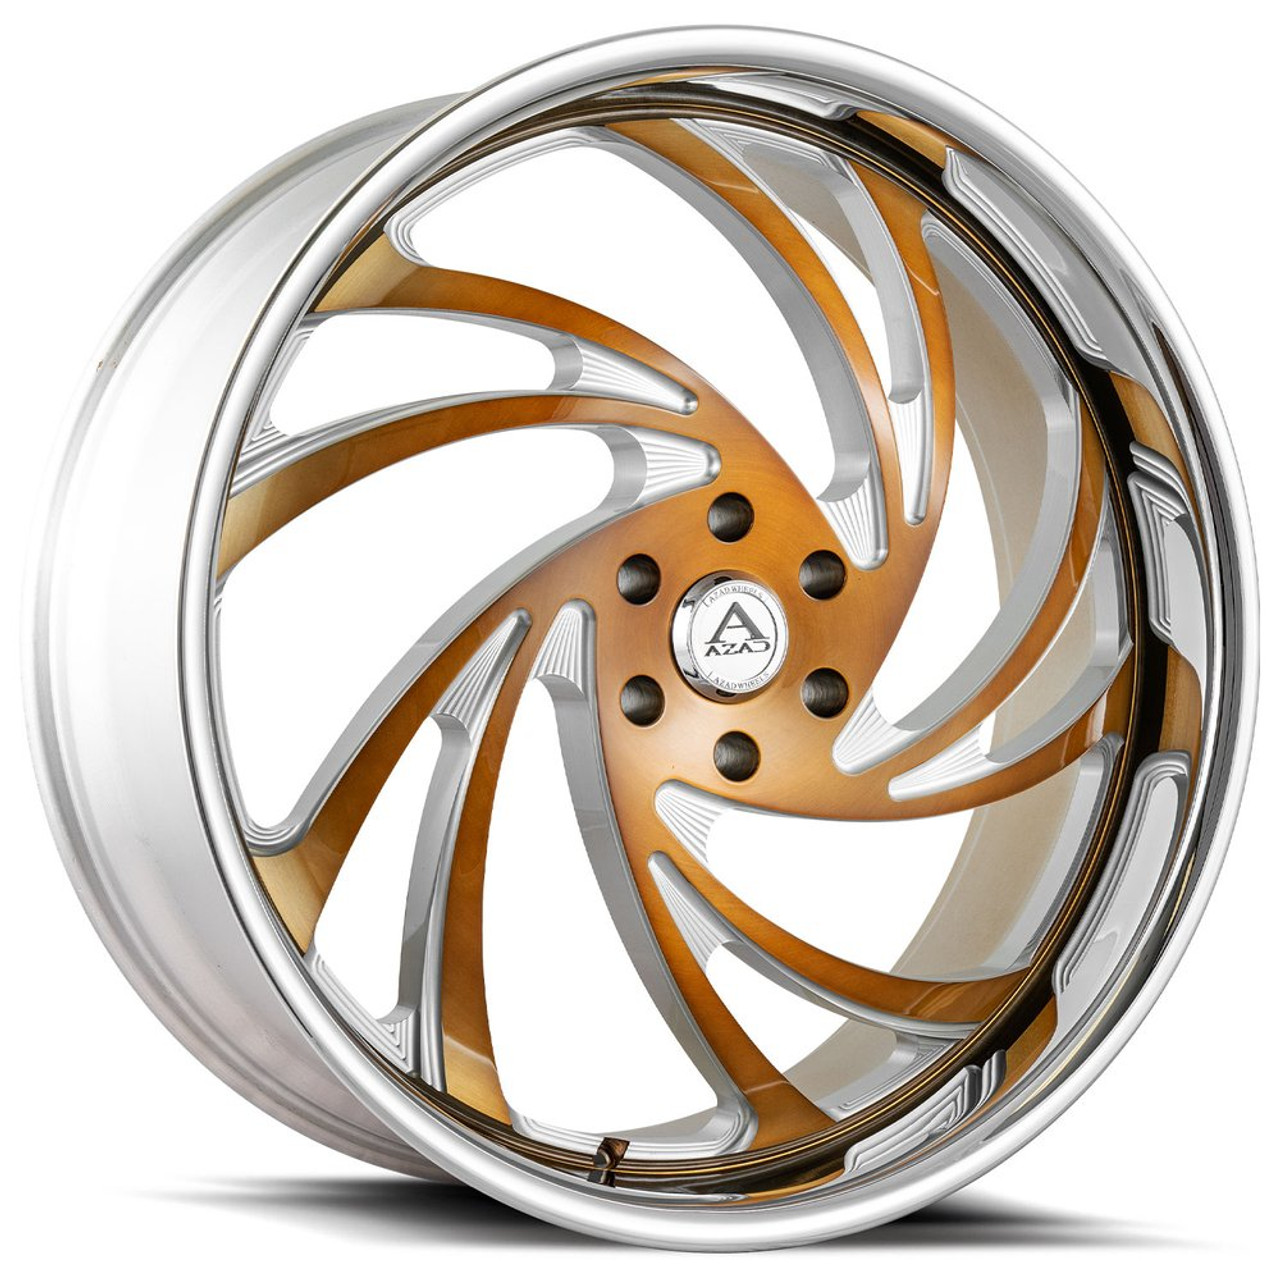 Azad Az Drip Wheels Rims 24x10 6x139.7 Milled Gold With Stainless Lip ...